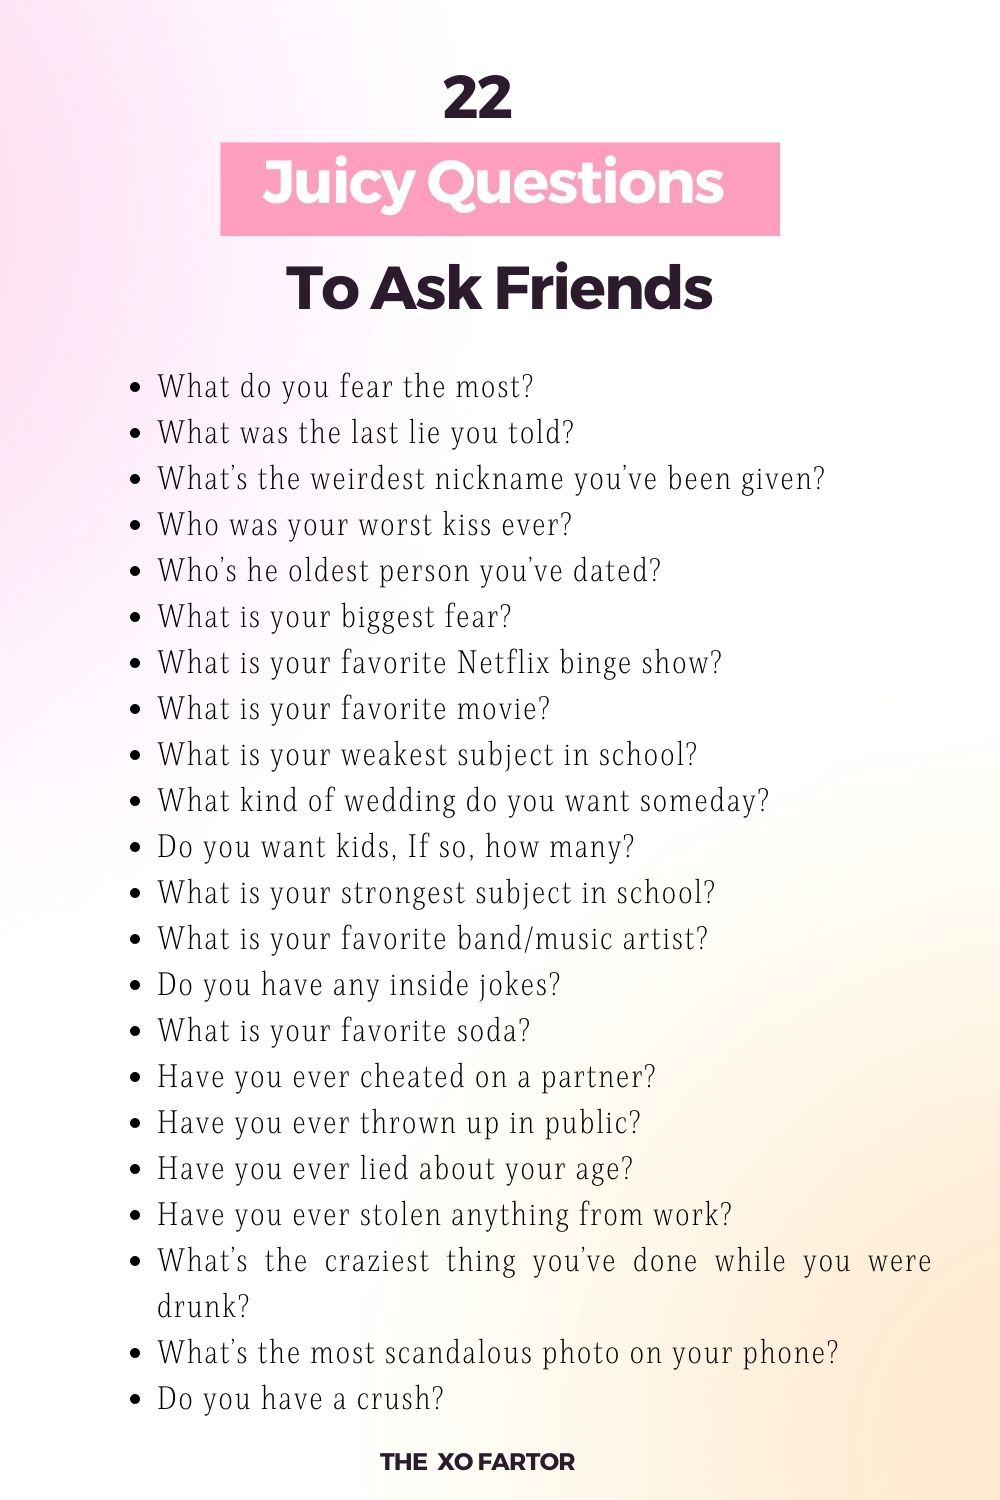 Juicy Questions To Ask Friends